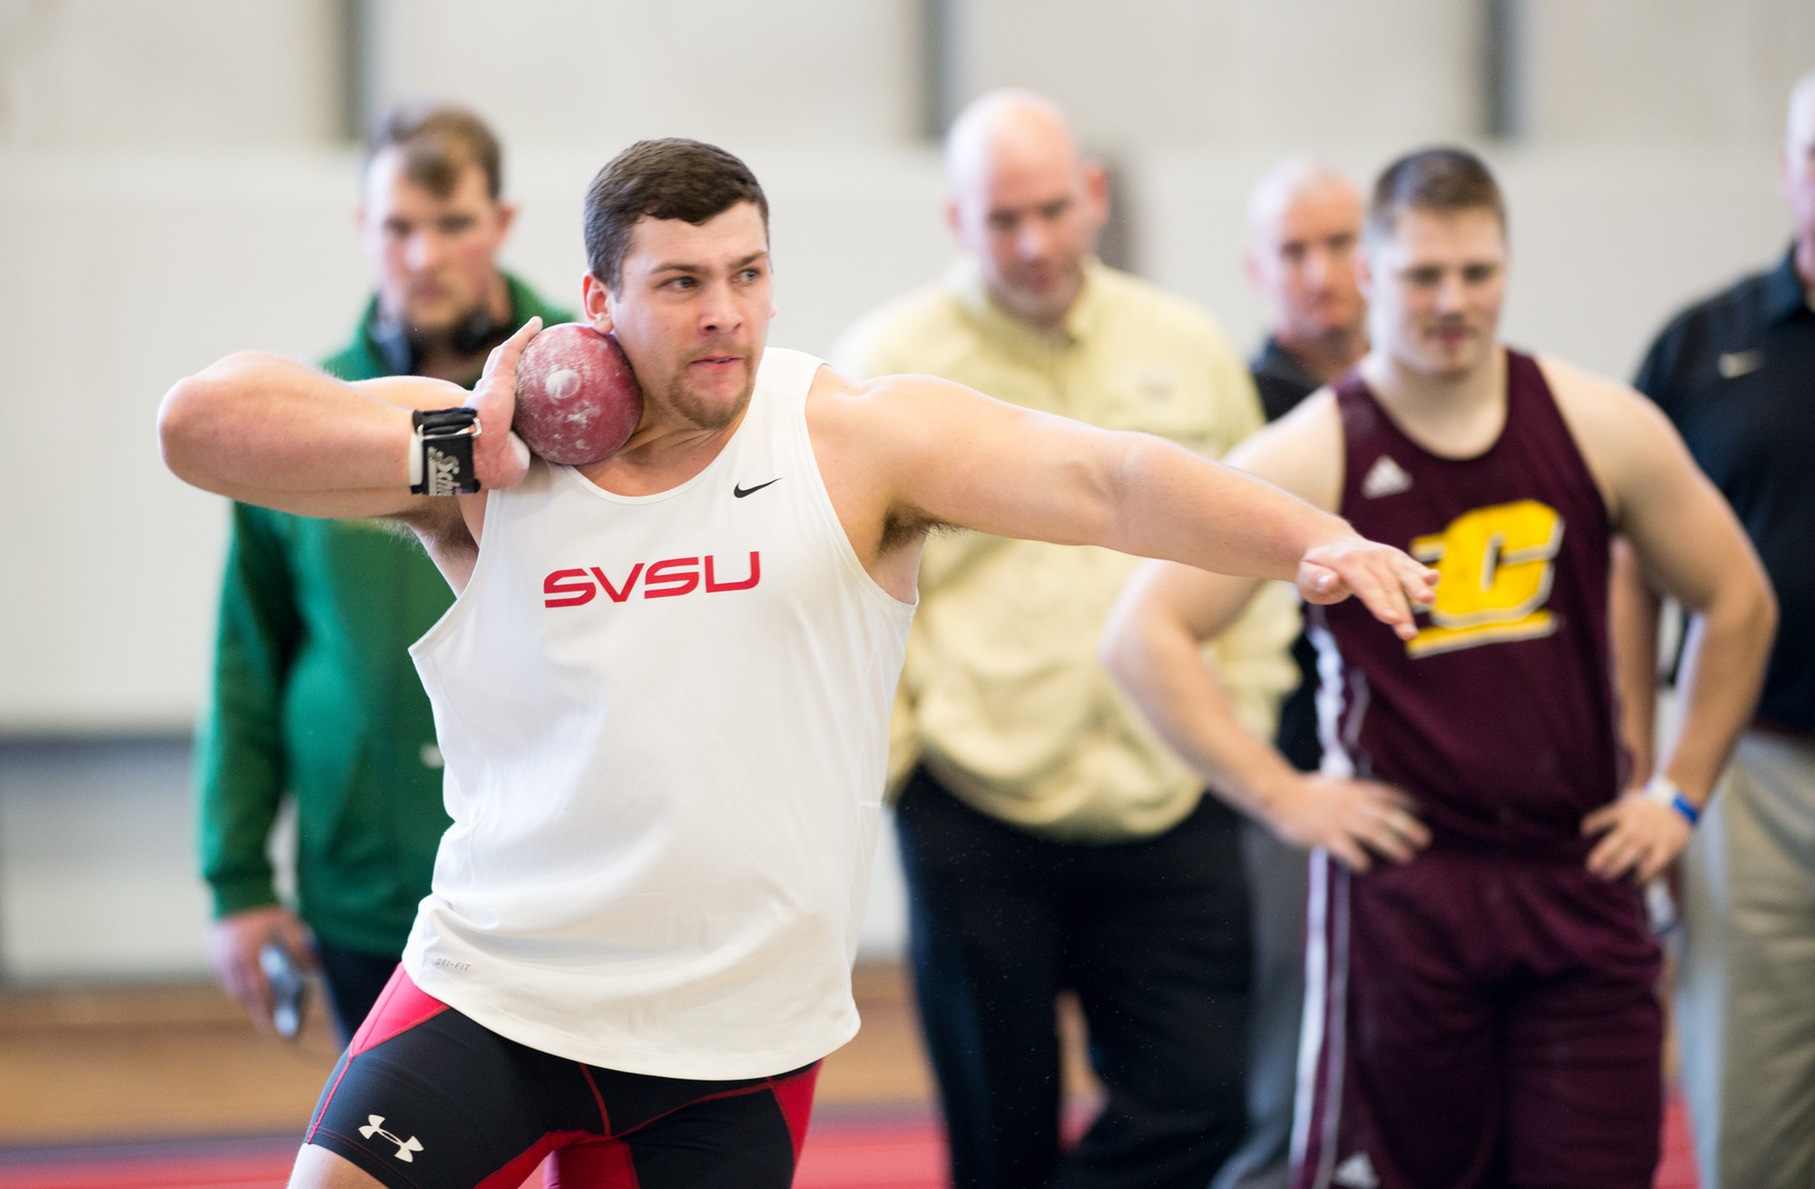 Cardinals host SVSU Tune-up to round-out regular season competition